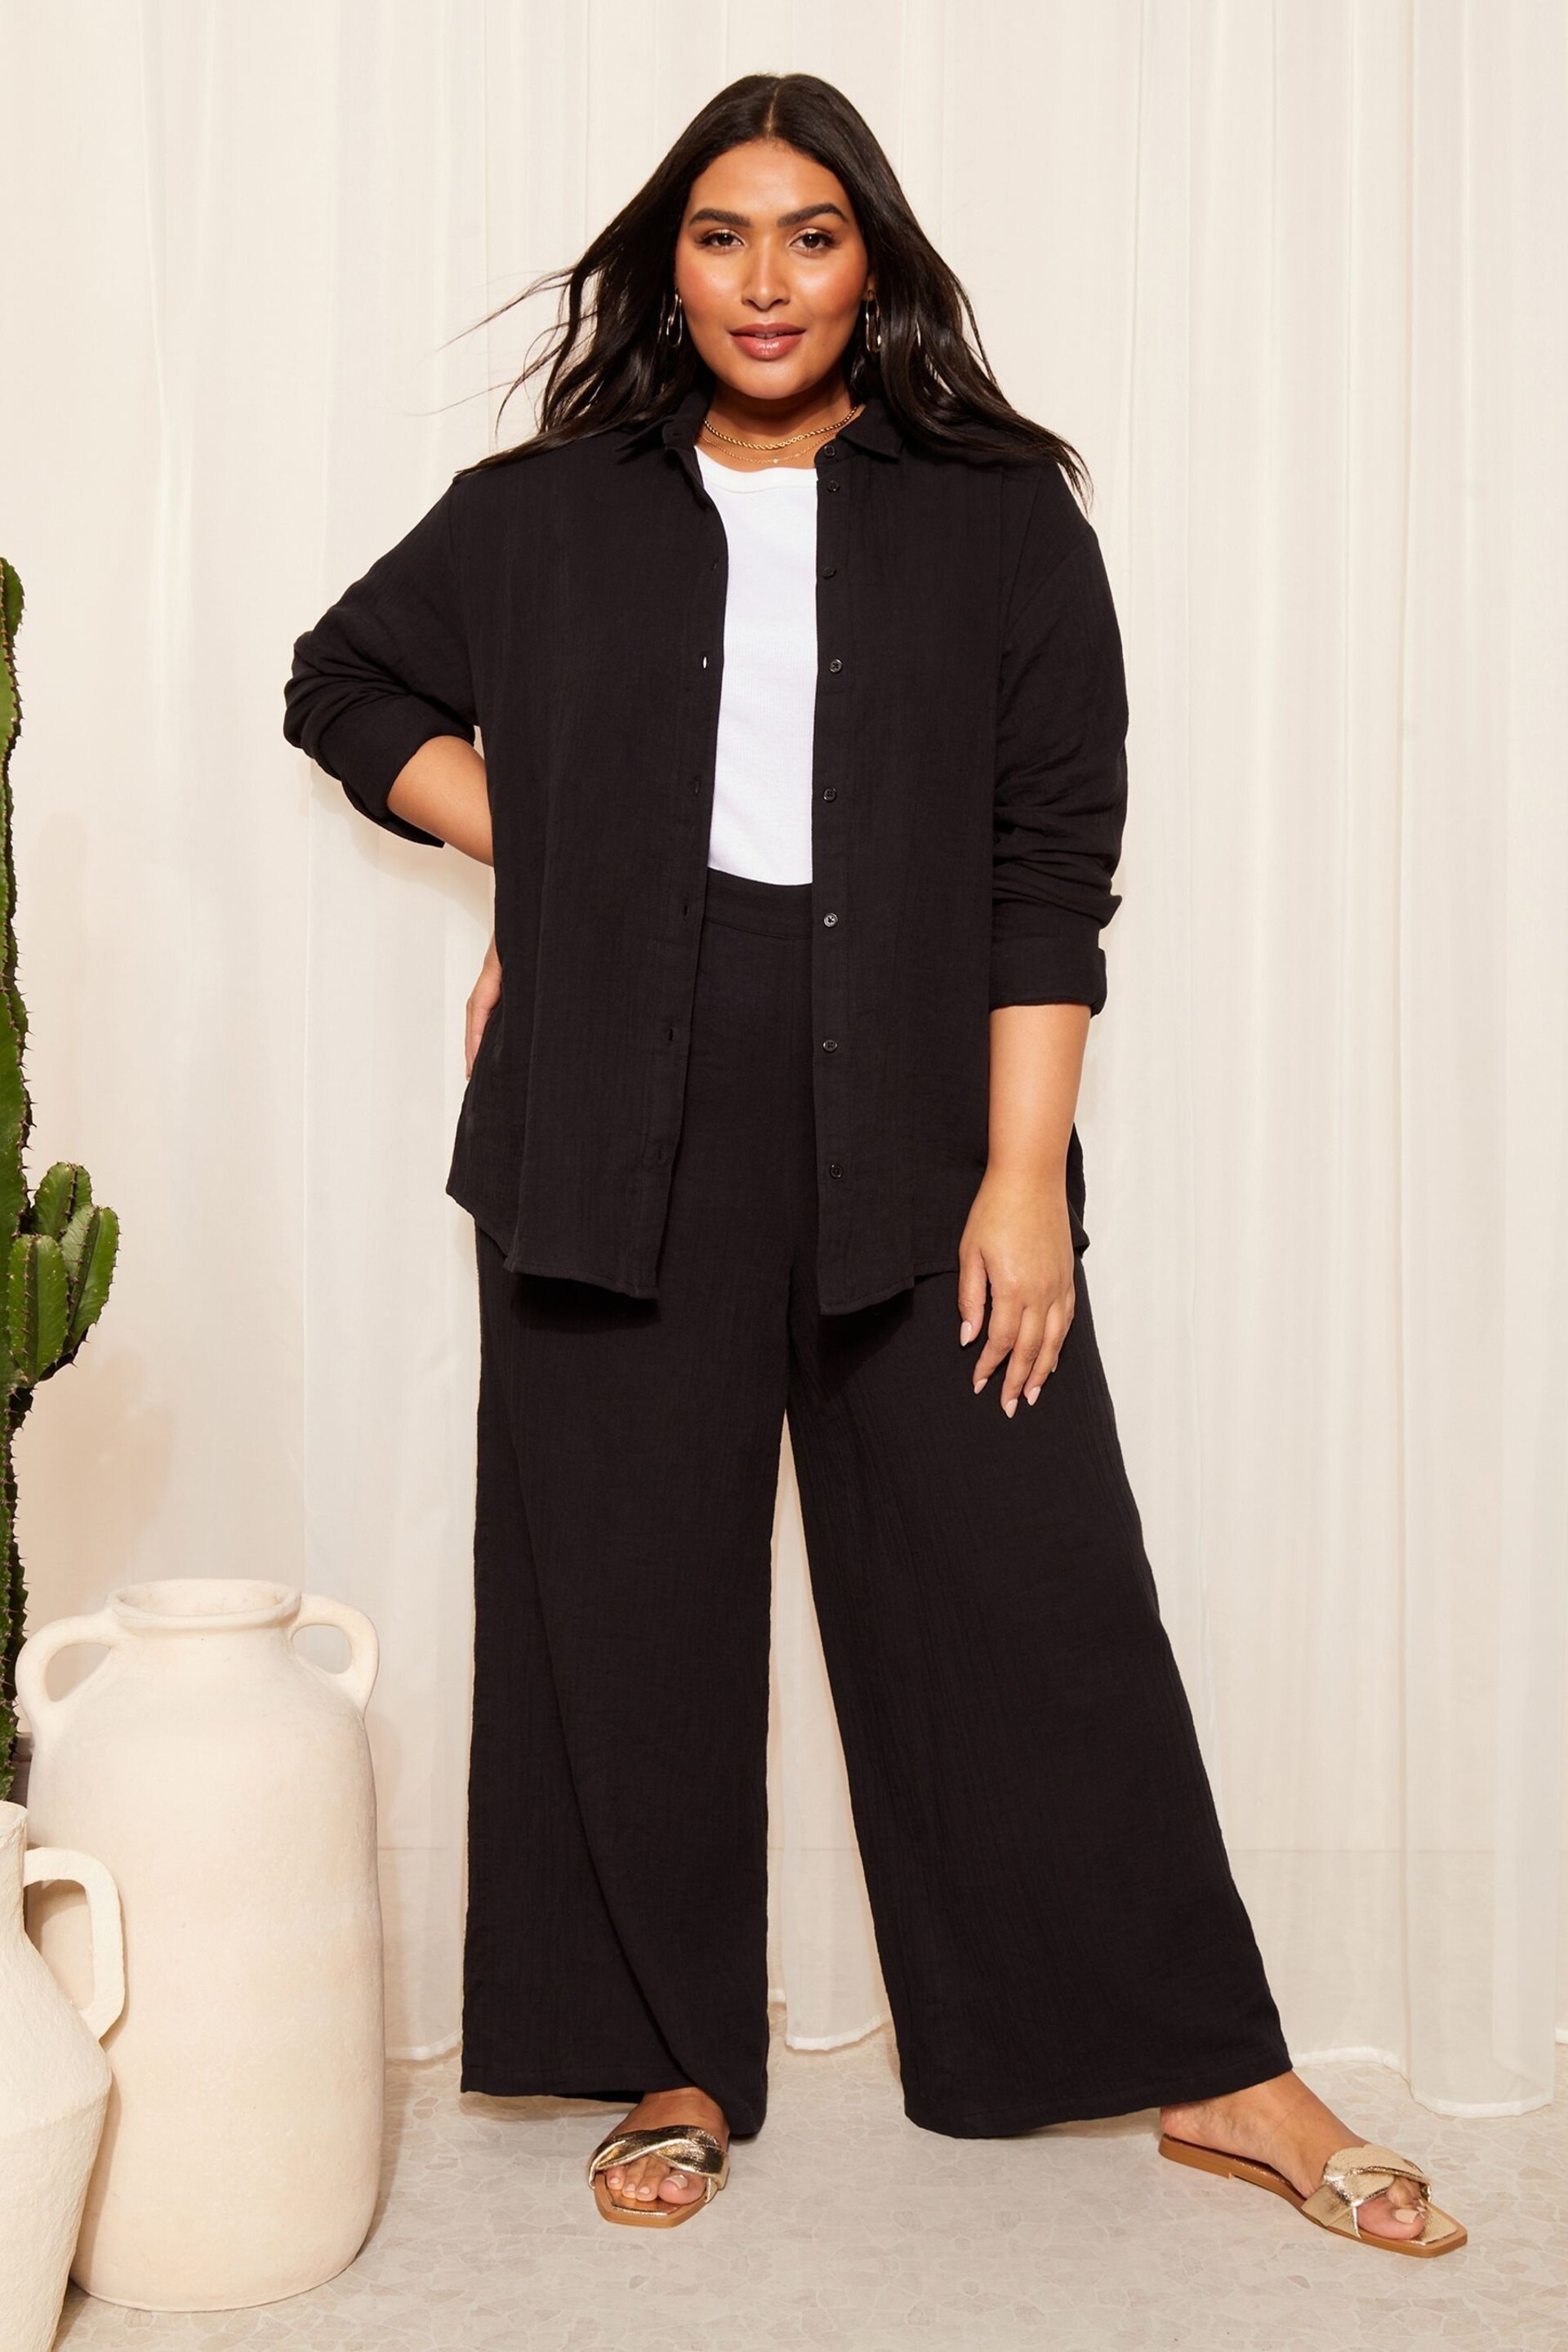 Curves Like These Black Linen Look Oversized Shirt - Image 3 of 4